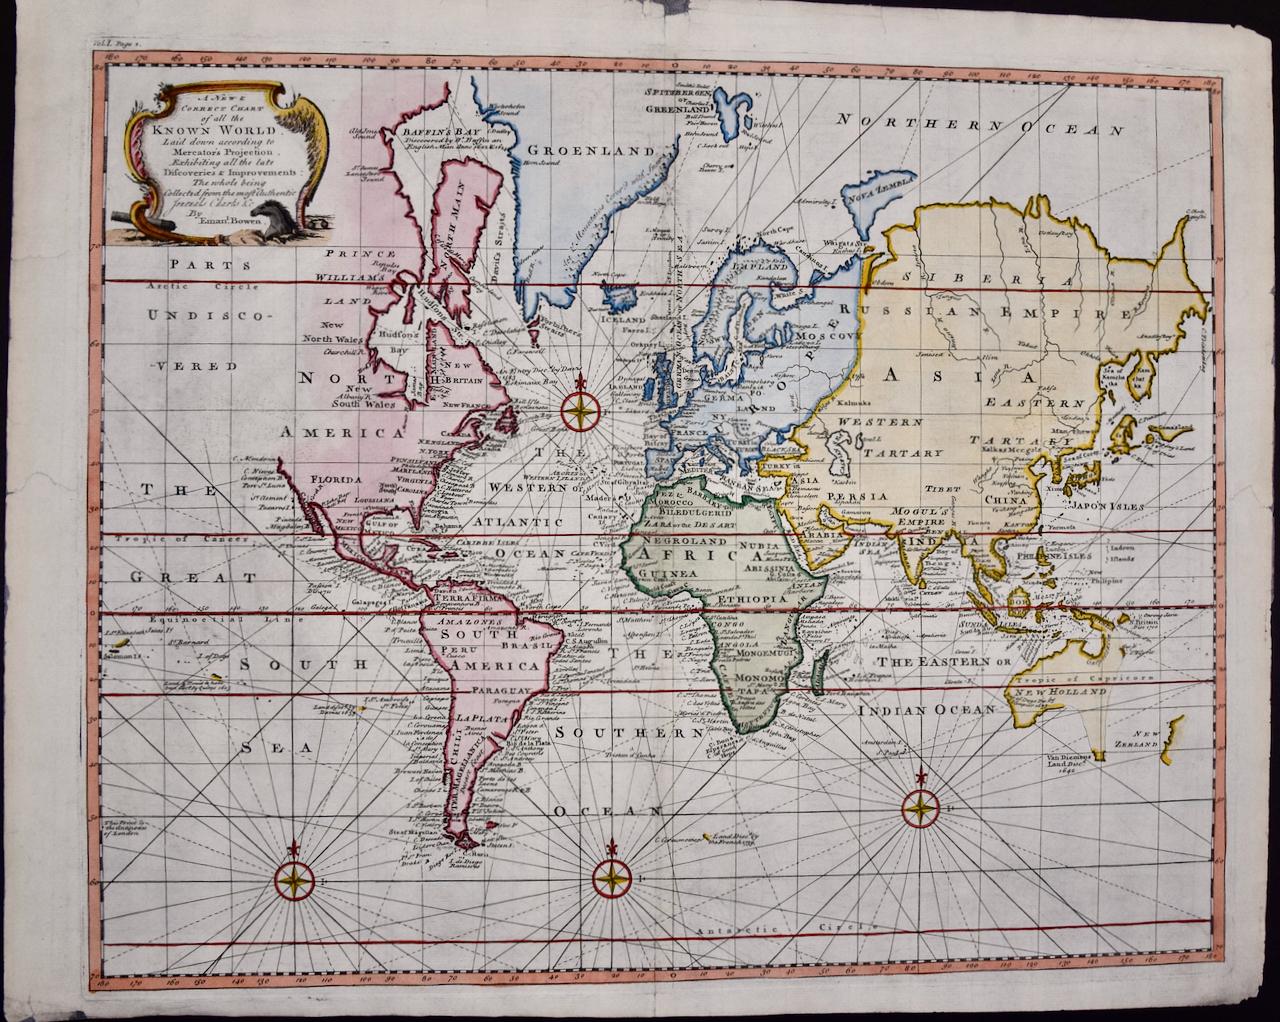 Map of the World: An Original 18th Century Hand-colored Map by E. Bowen